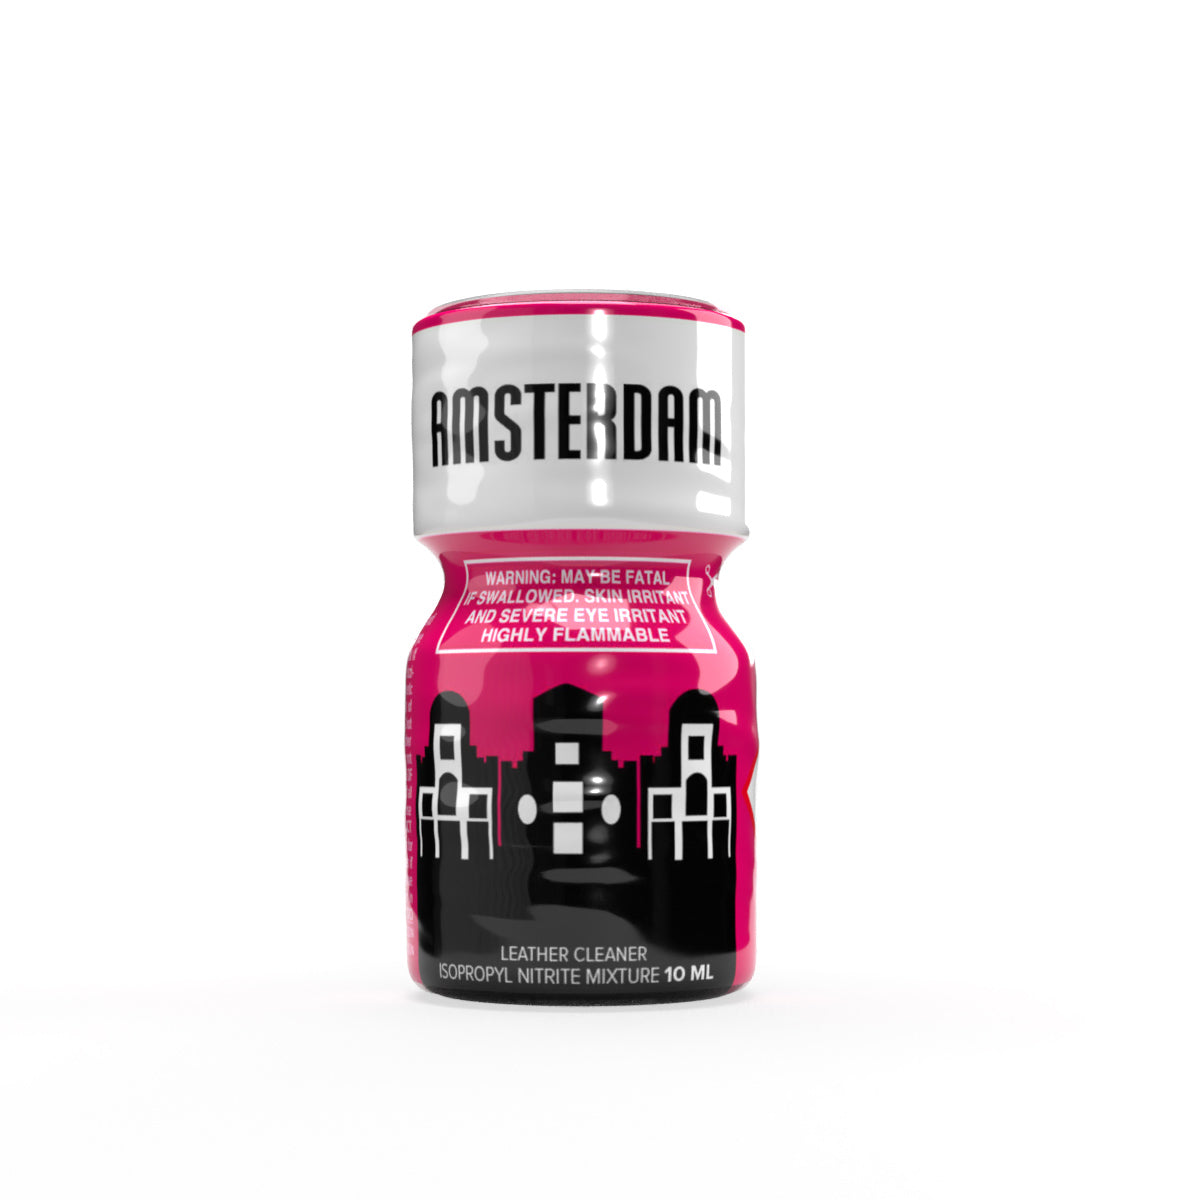 A product photo of a bottle of Amsterdam Poppers.